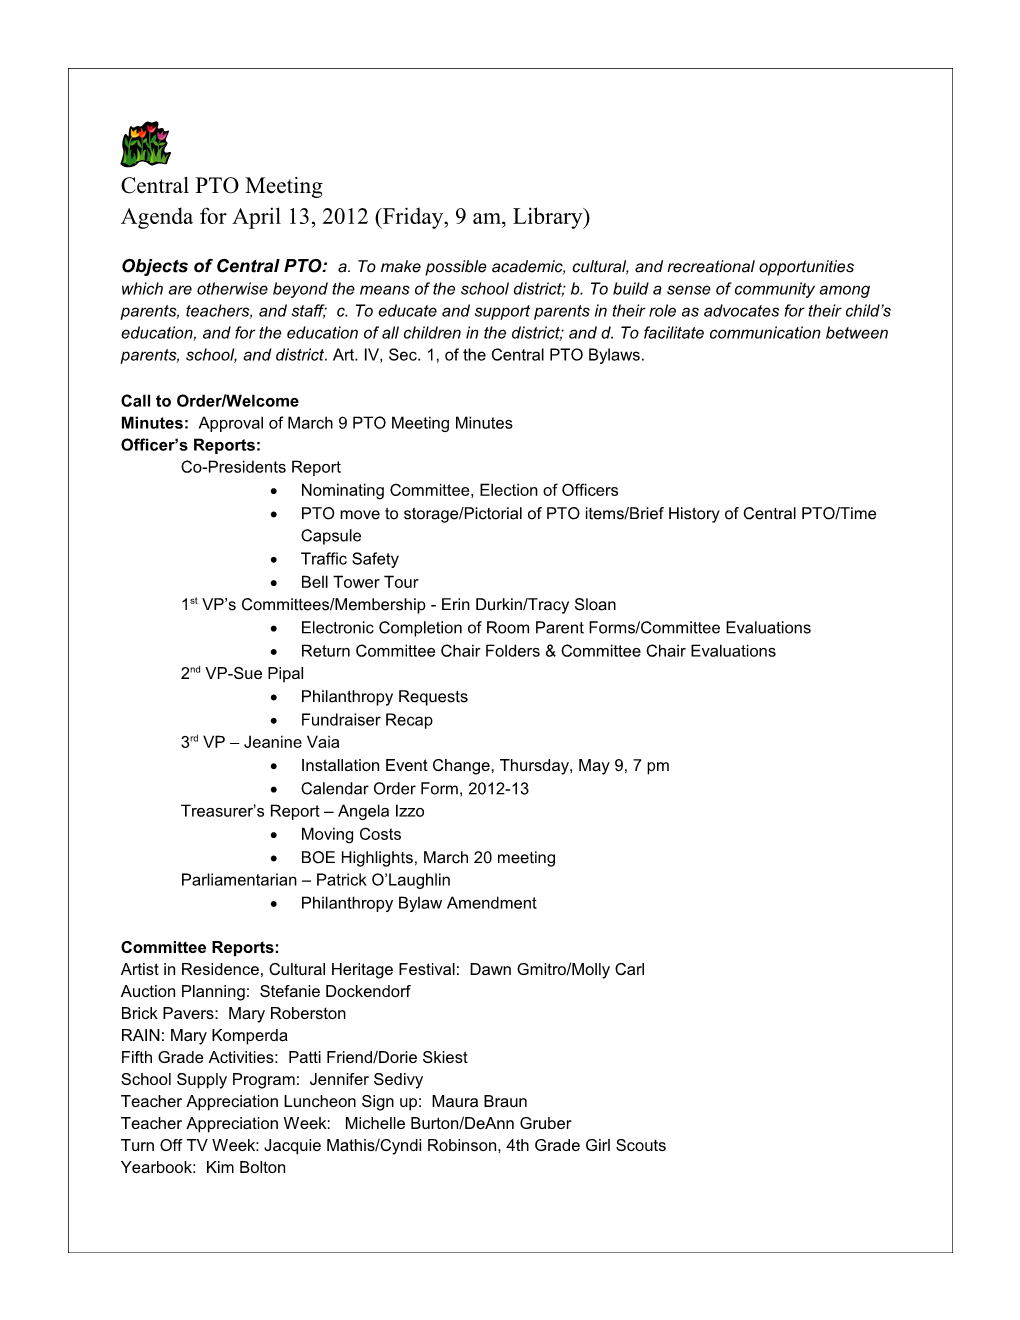 Agenda for April 13, 2012 (Friday, 9 Am, Library)